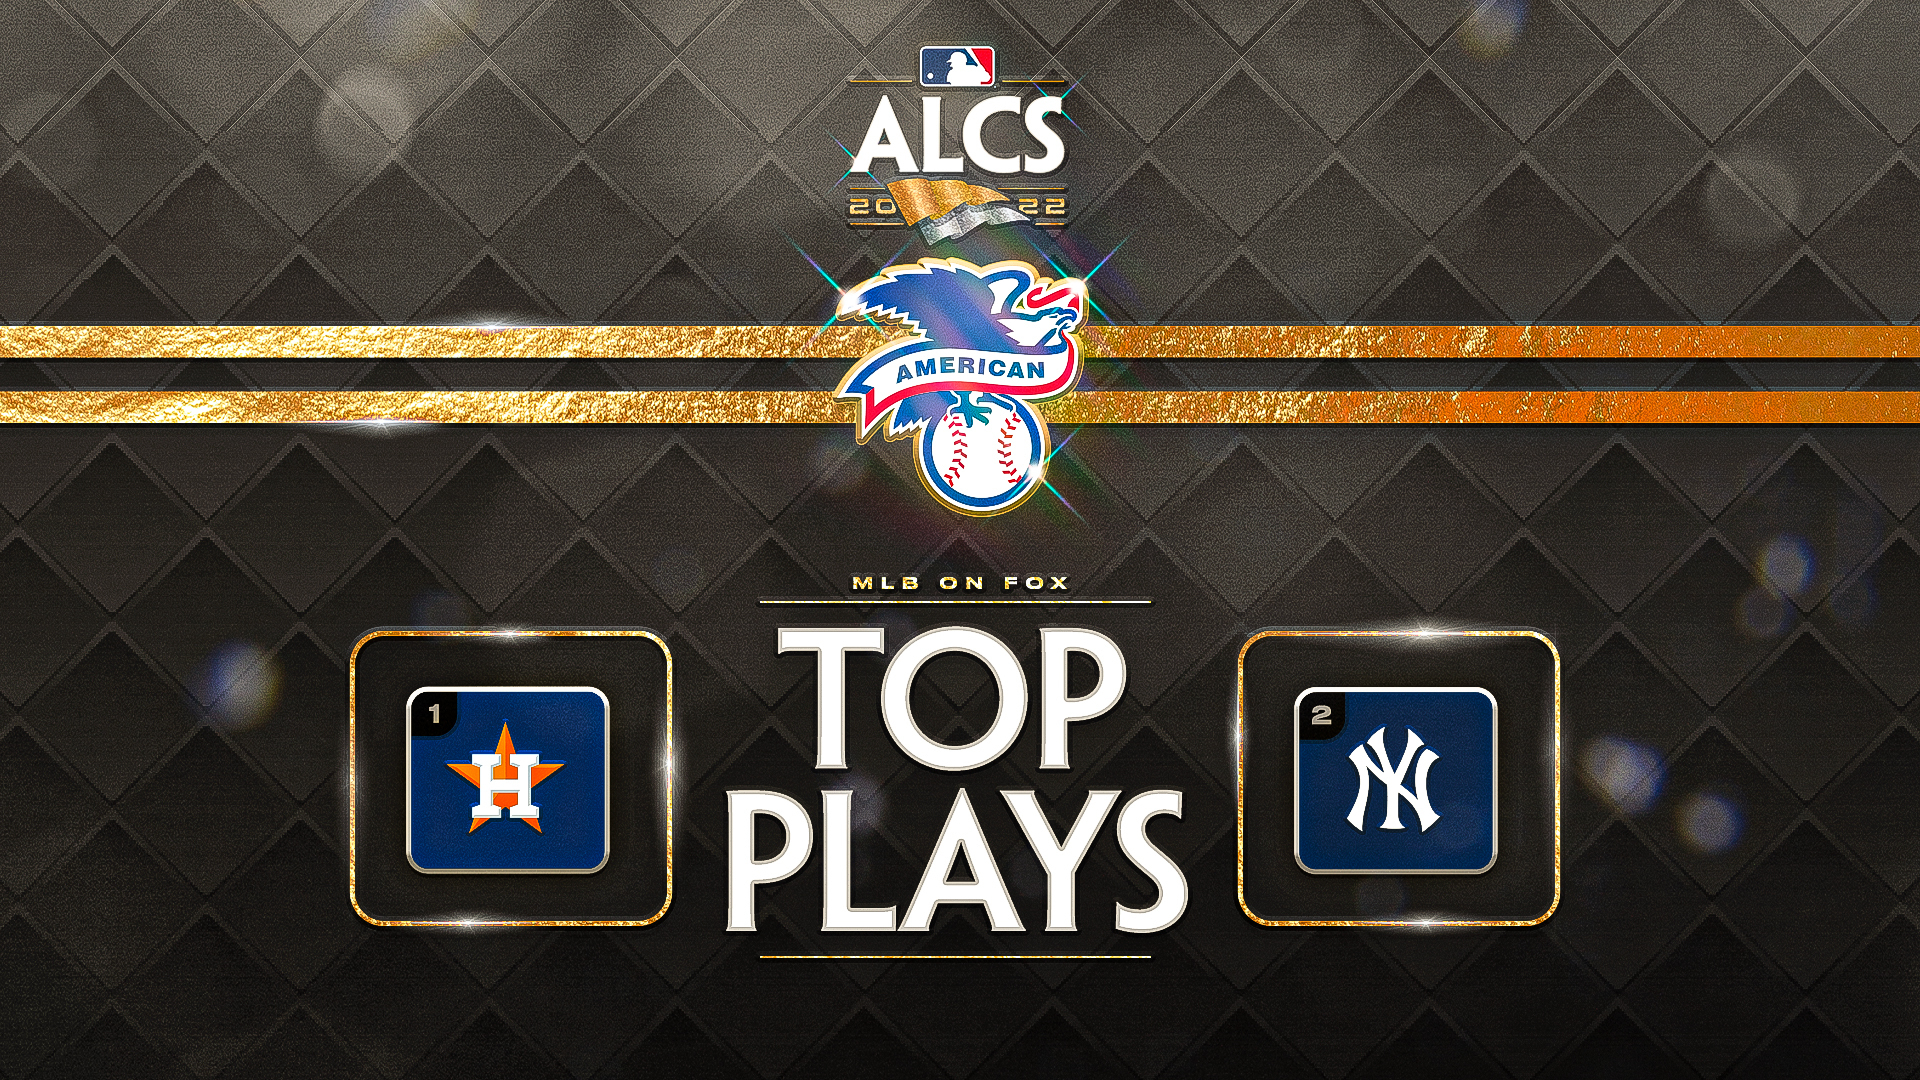 2022 MLB Playoffs: Astros sweep Yankees in ALCS, cruise into World Series